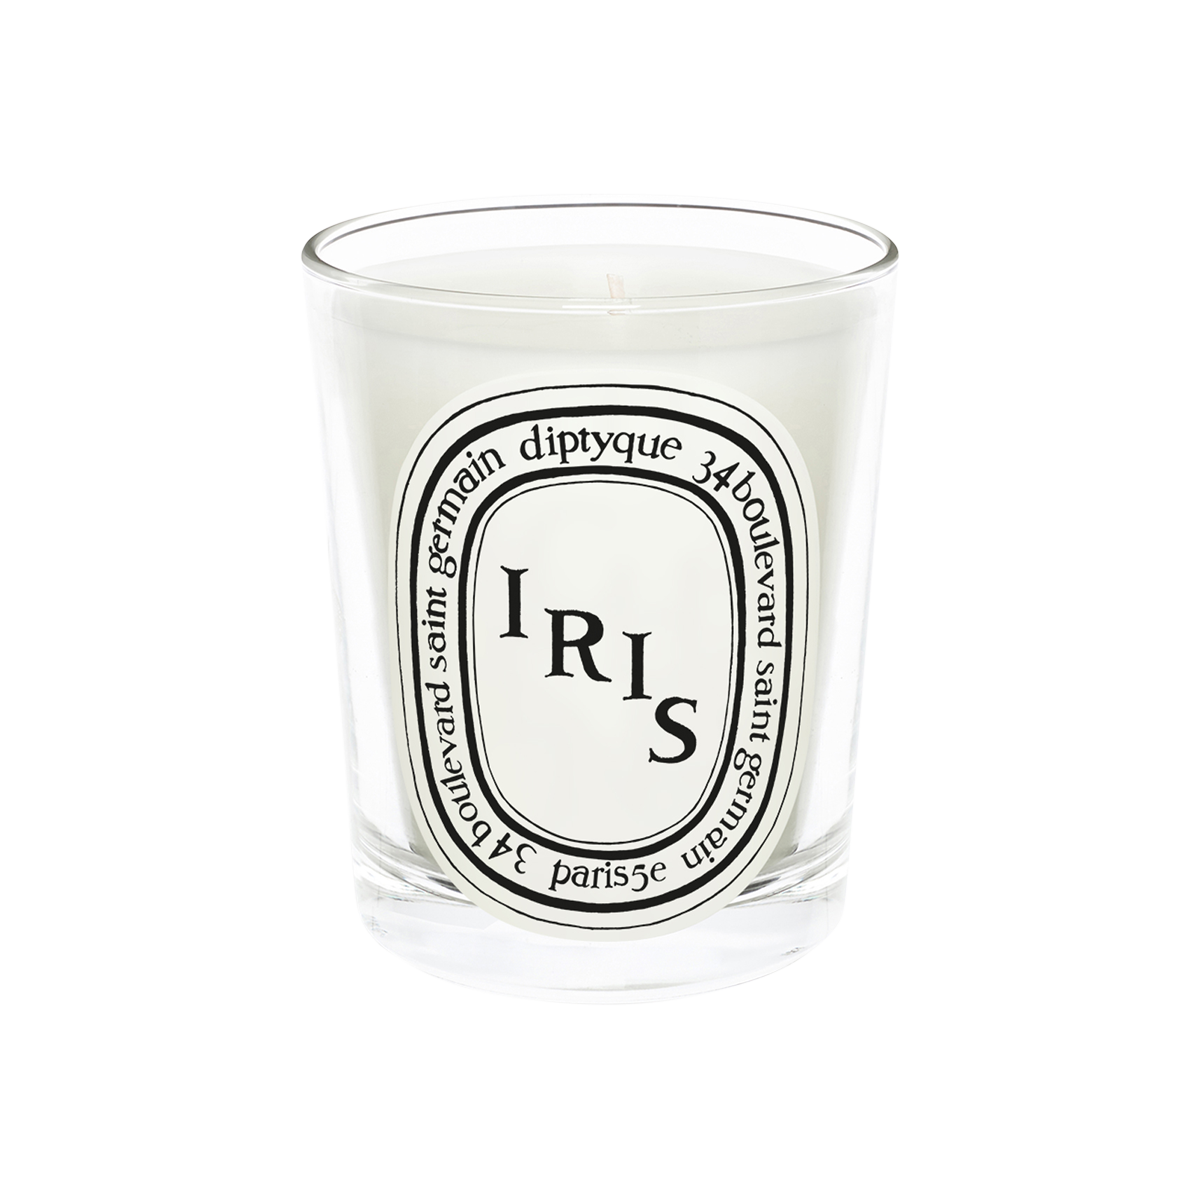 Diptyque - Iris Scented Candle